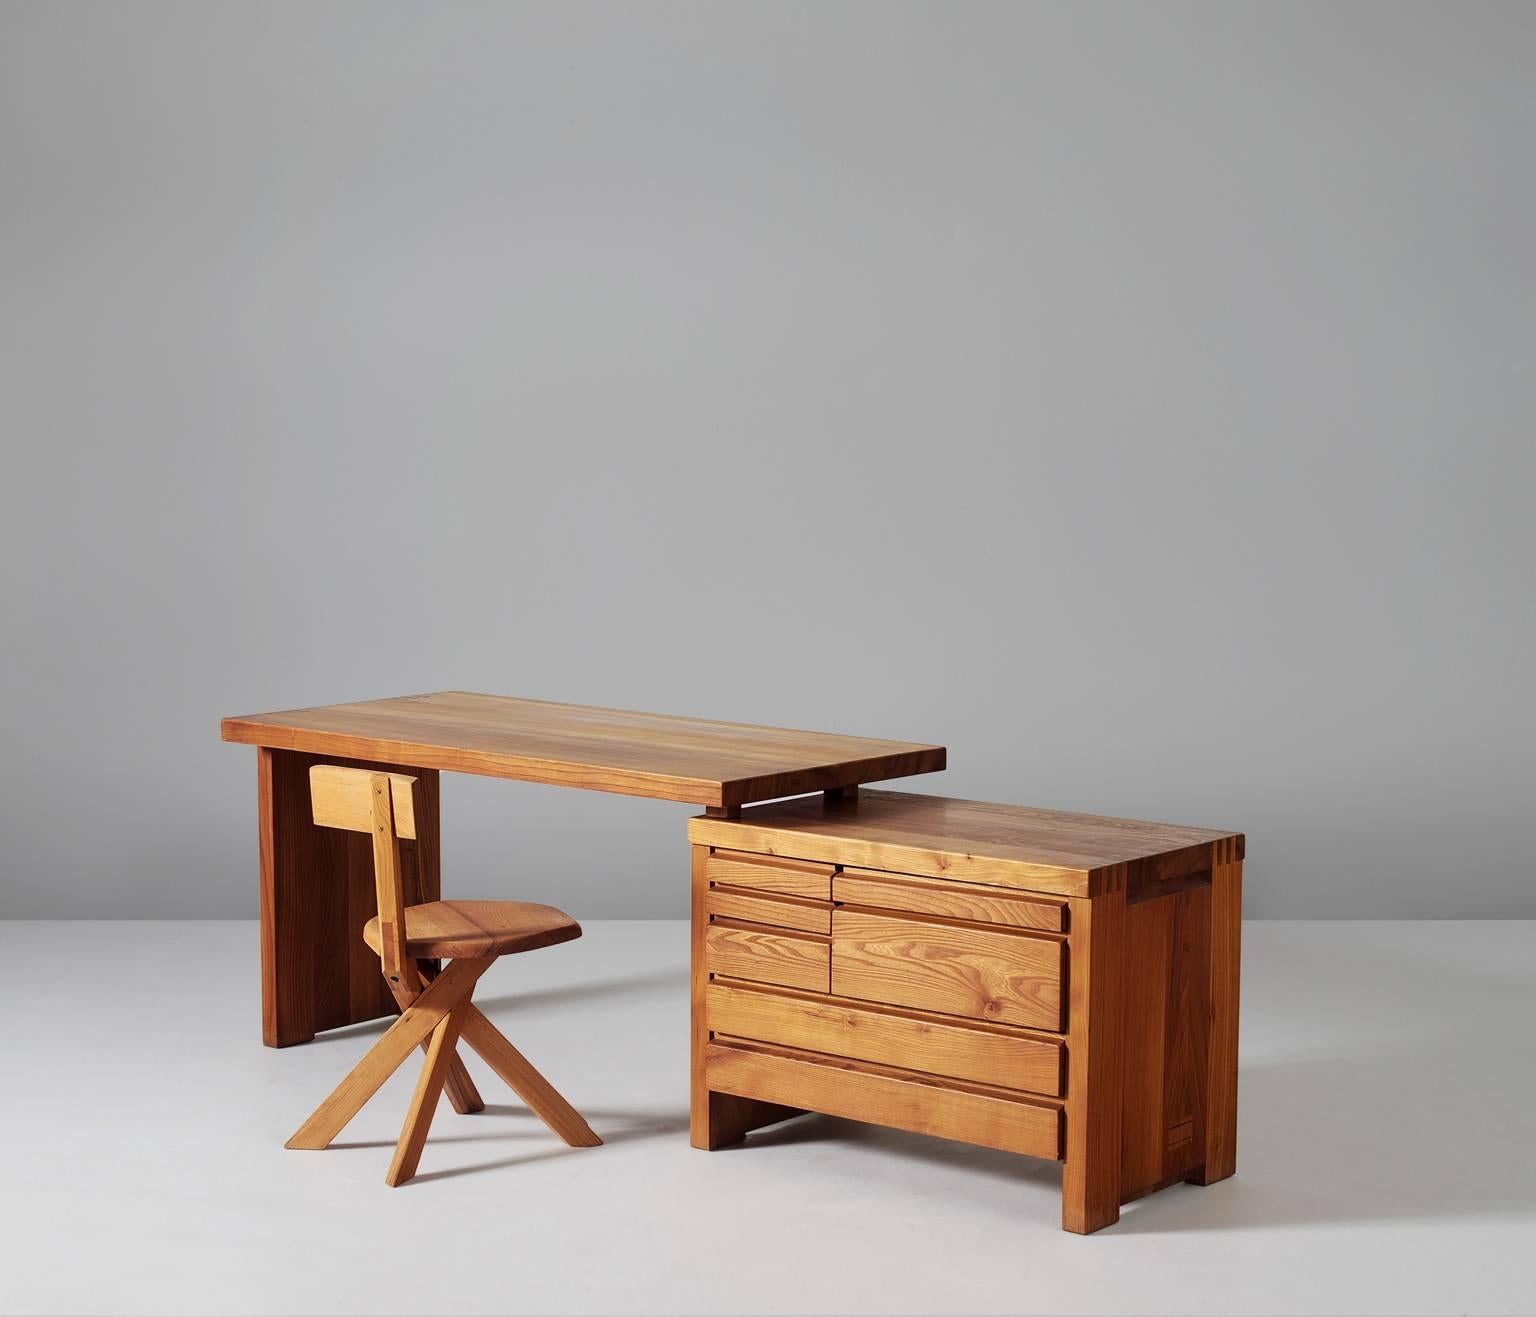 Pierre Chapo, desk in elmwood, model B19, France, 1960s. 

Executive desk in elmwood. The simplicity of this design is it's strength. The quality of the elmwood structure is sublime, it's kept together with beautifully made wooden joints. The